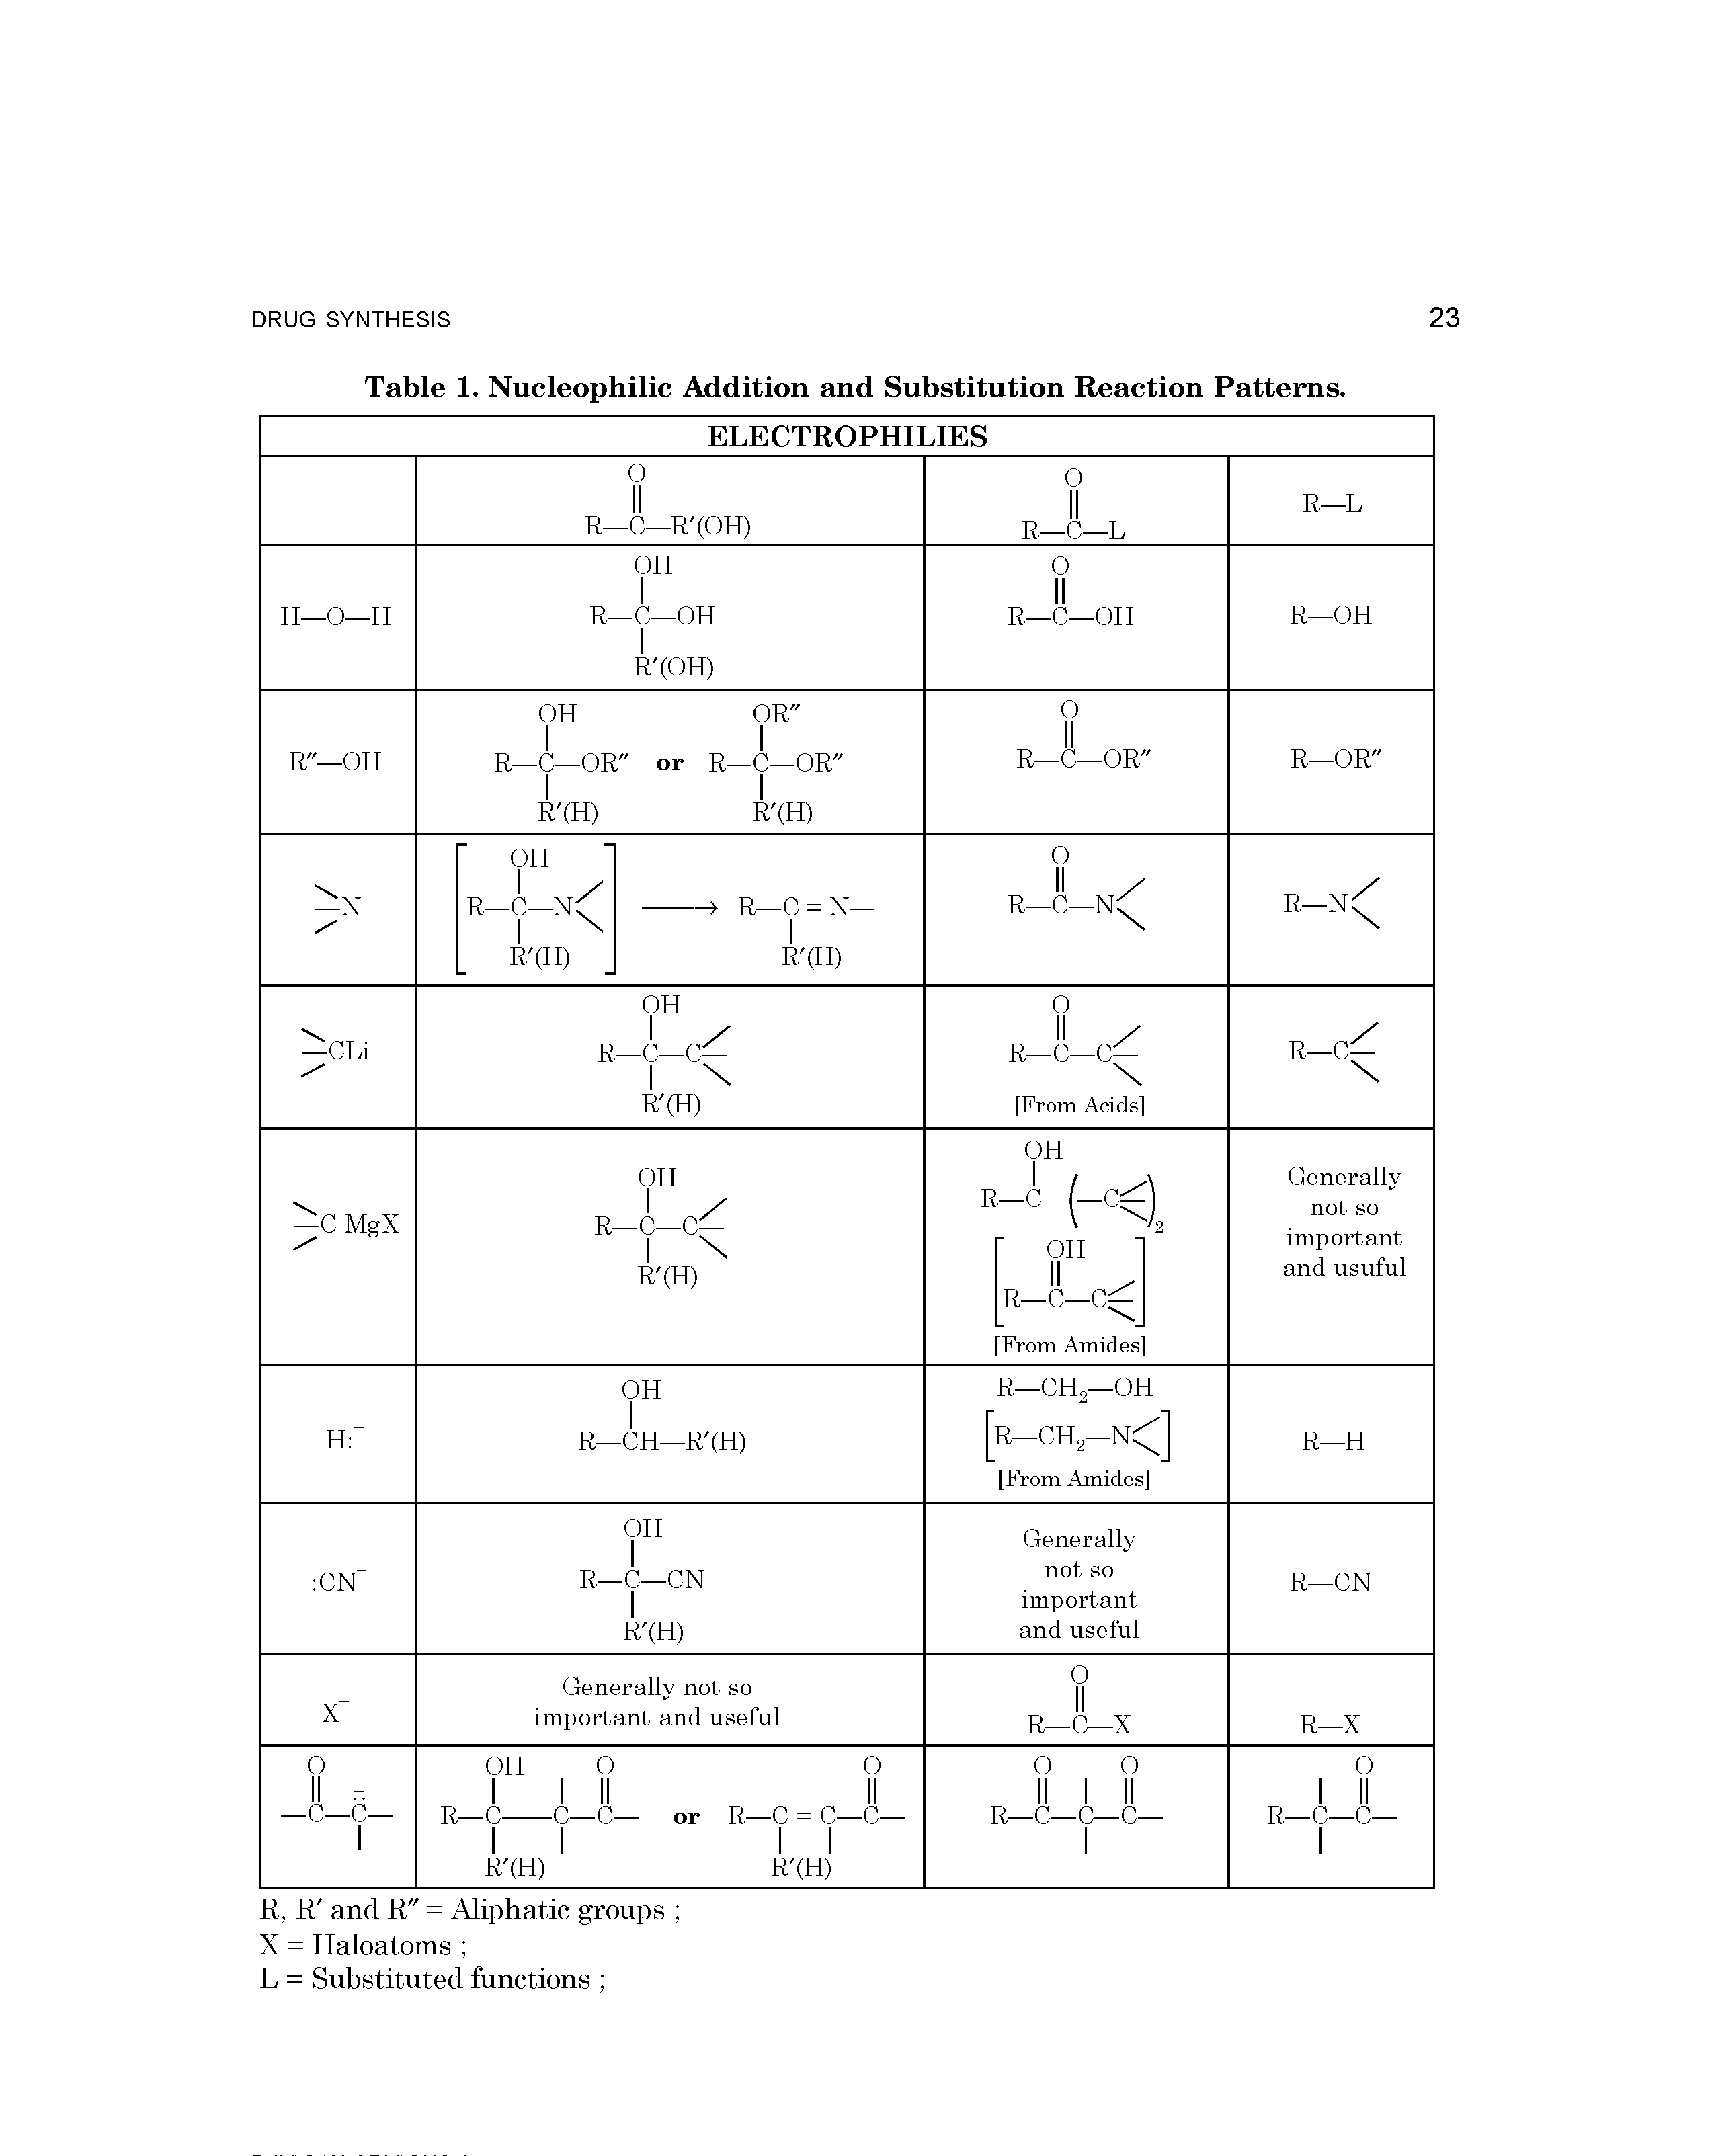 Table 1. Nucleophilic Addition and Substitution Reaction Patterns.